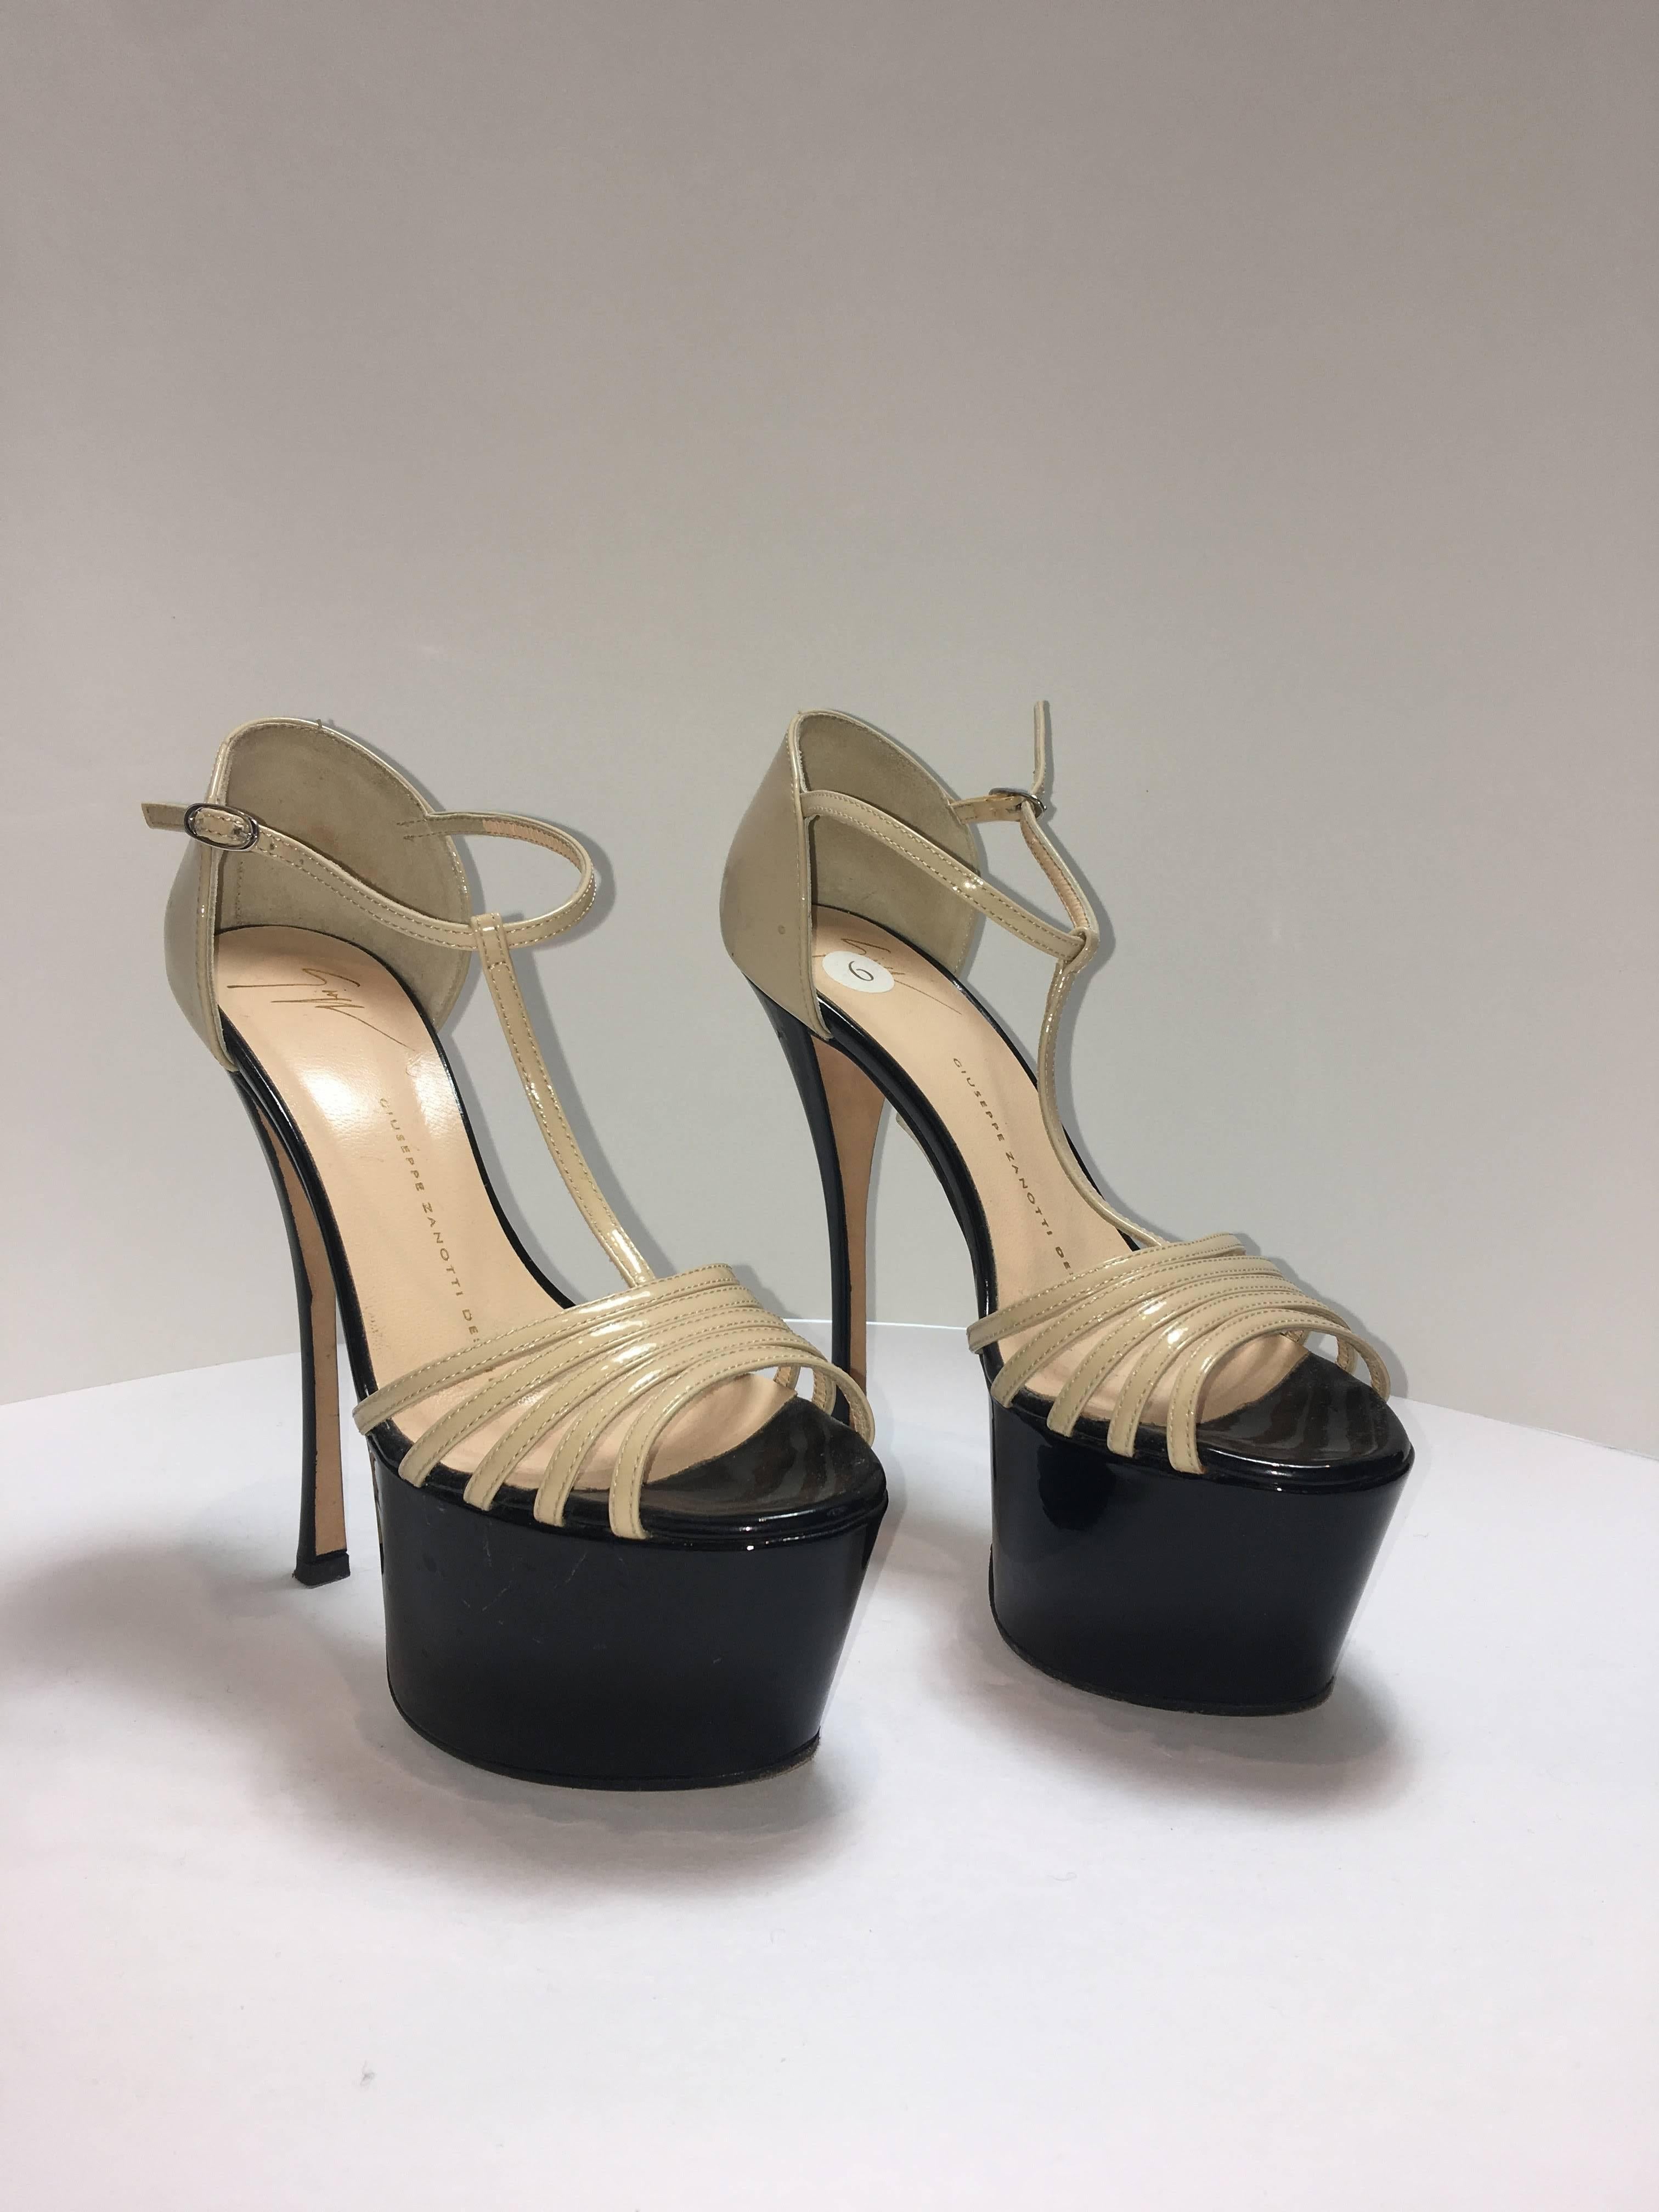 Giuseppe Zanotti T-Strap Heels in Nude and Black Patent Leather. Platform heels in size 37. 